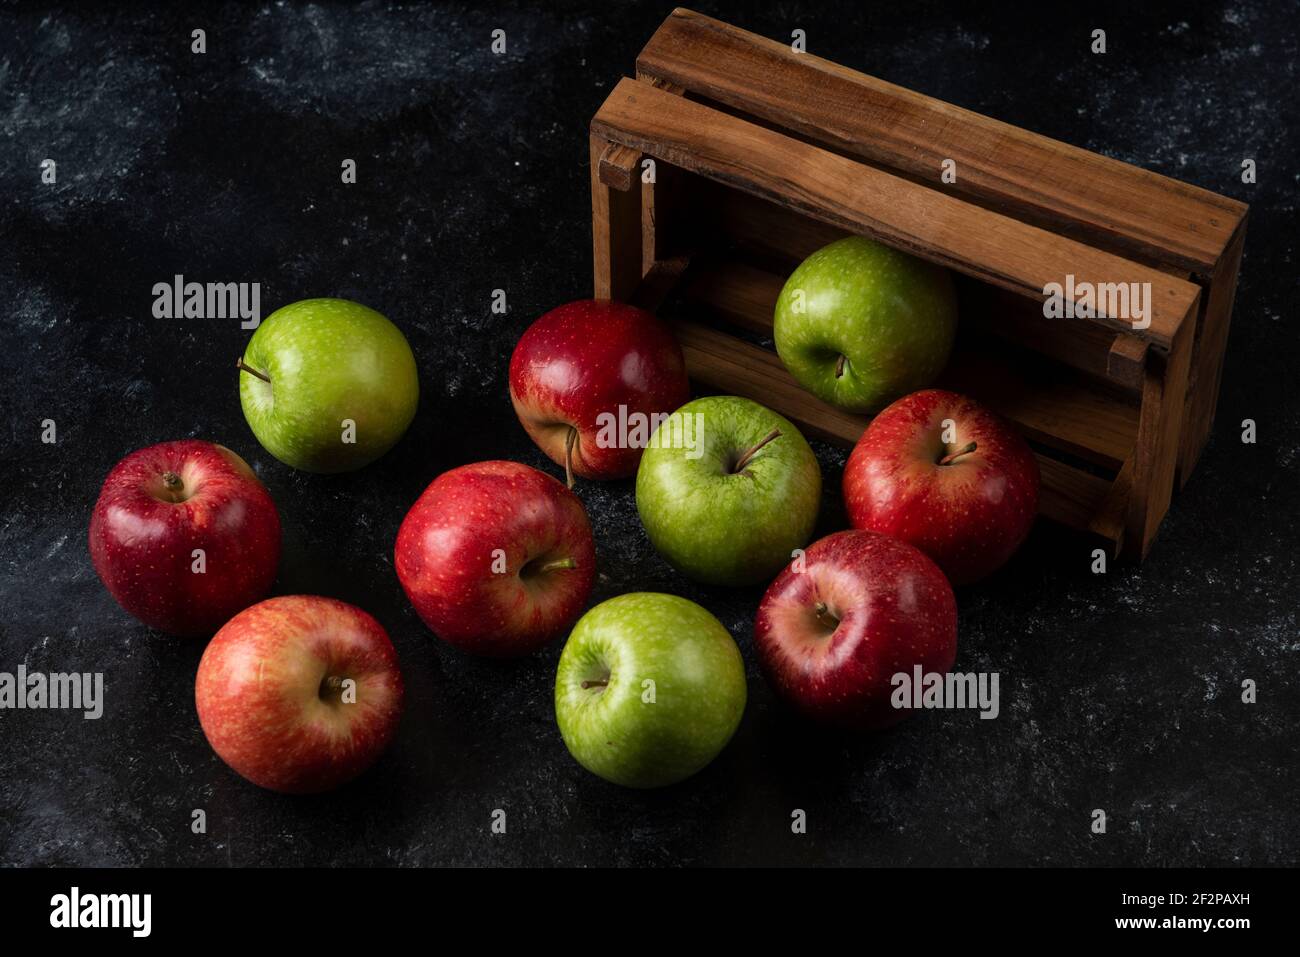 Ripe organic apples out of wooden box on black background Stock Photo